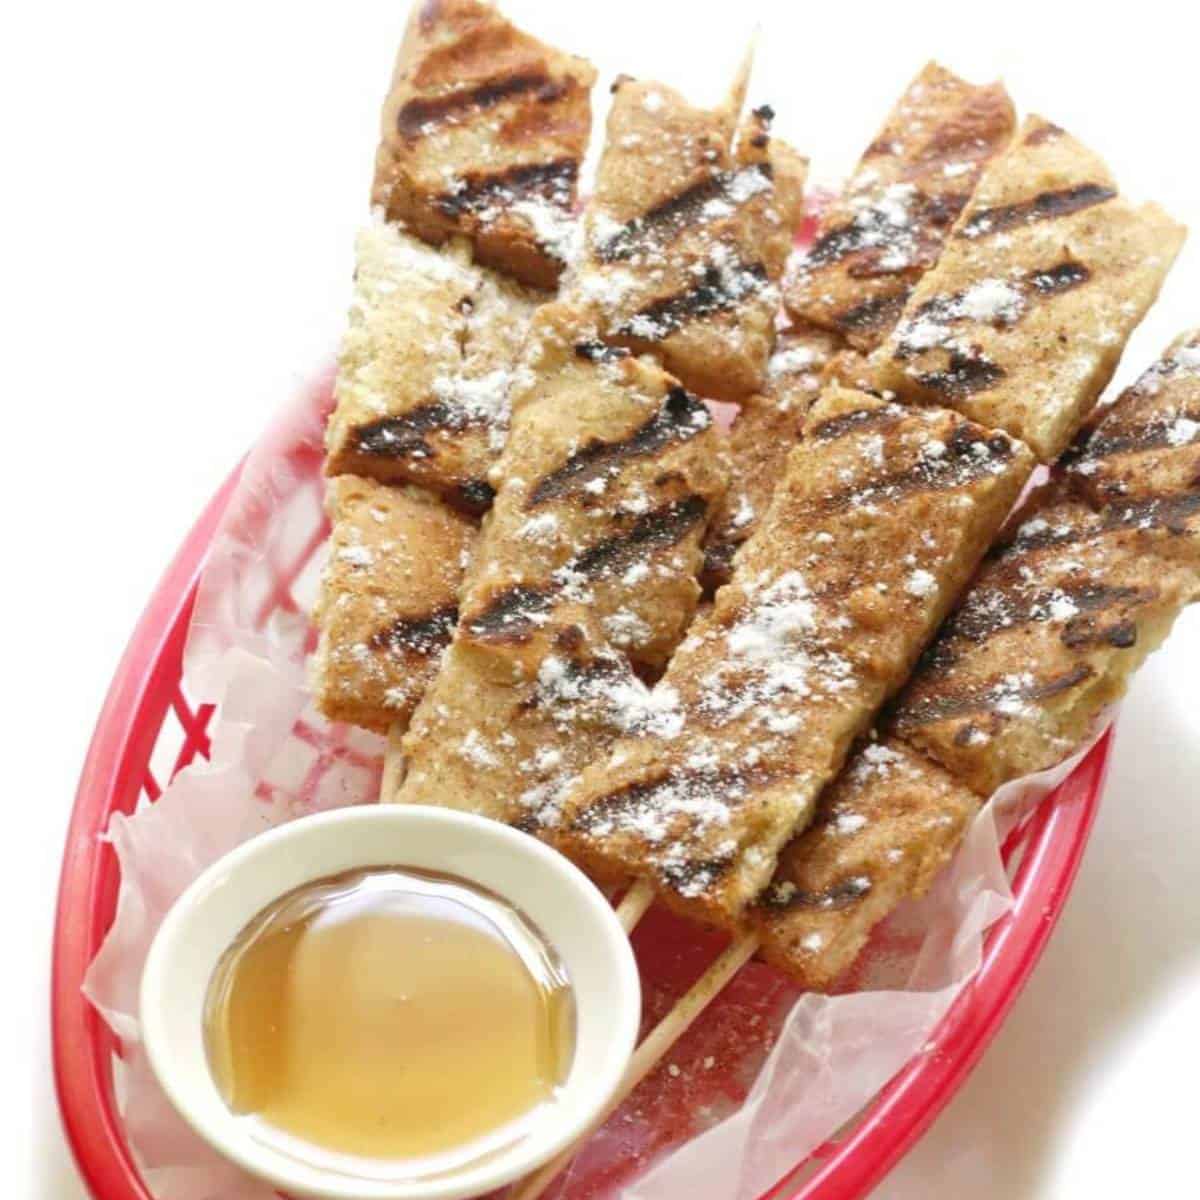 french toast sticks on skewers dusted with powder sugar and maple syrup for dipping.